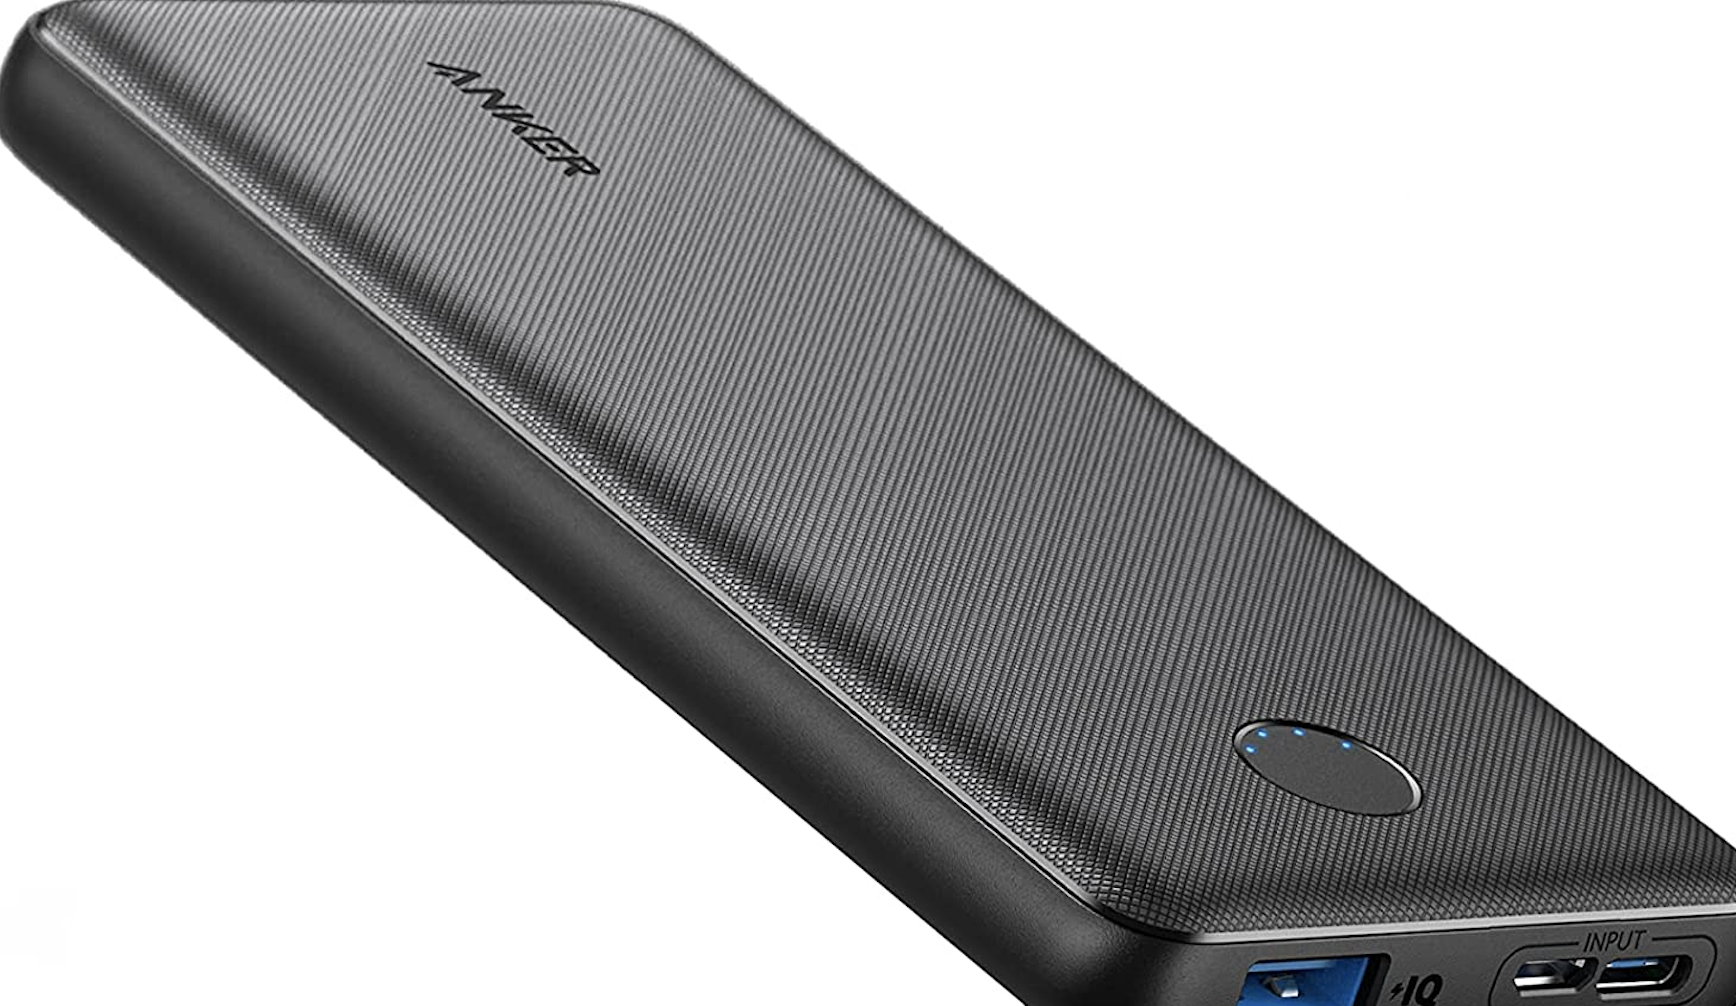 11 Portable Chargers and Power Banks That Make Great Holiday Gifts